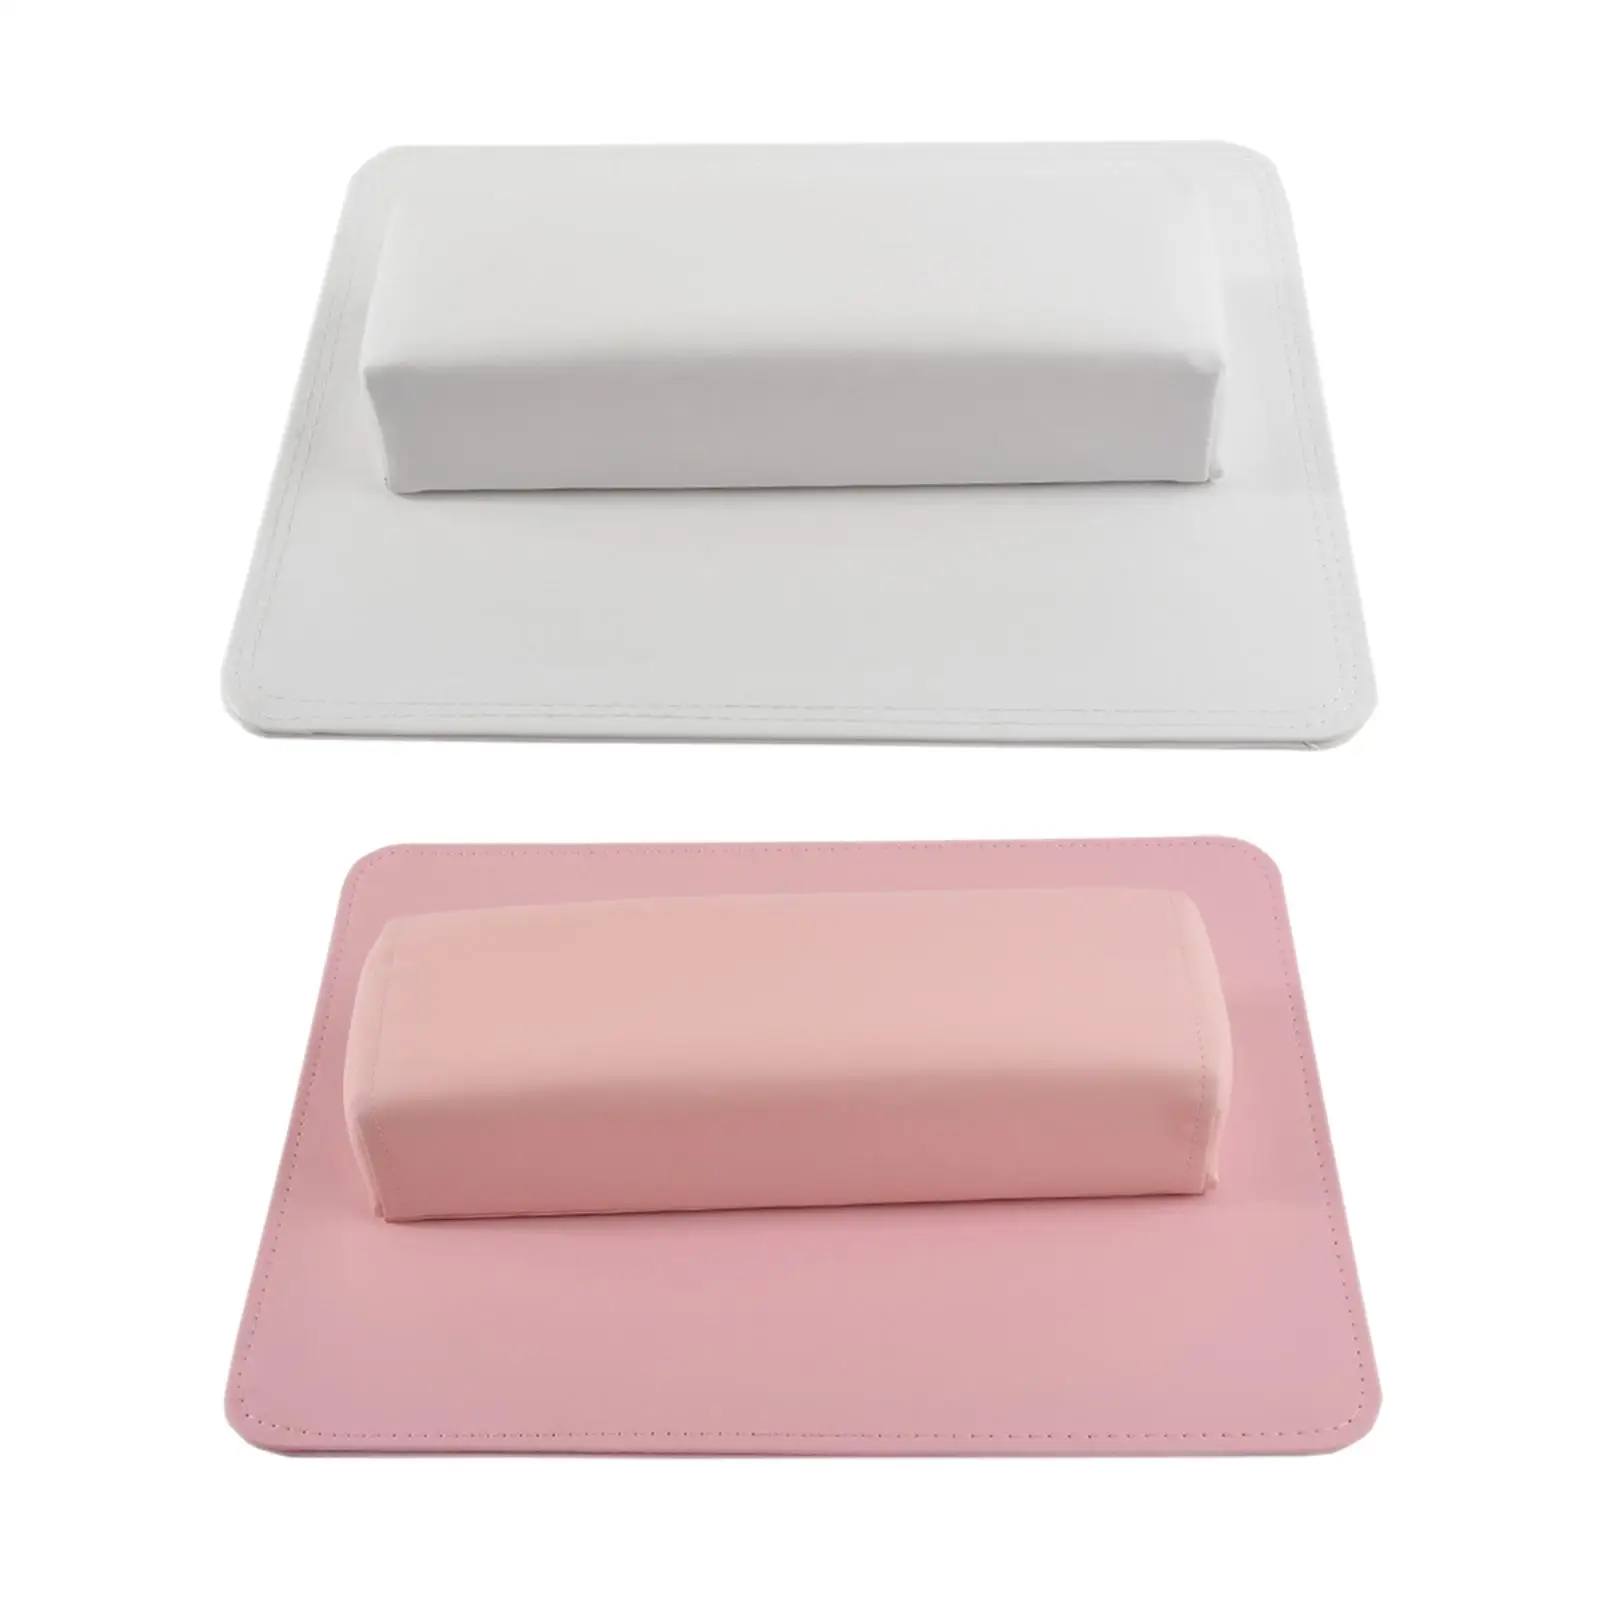 Nail Hand Pillow and Mat Set PU Leather Nail Art Cushion Mat Set Nail Hand Rest Cushion Hand Cushion for Home Salon Manicurist